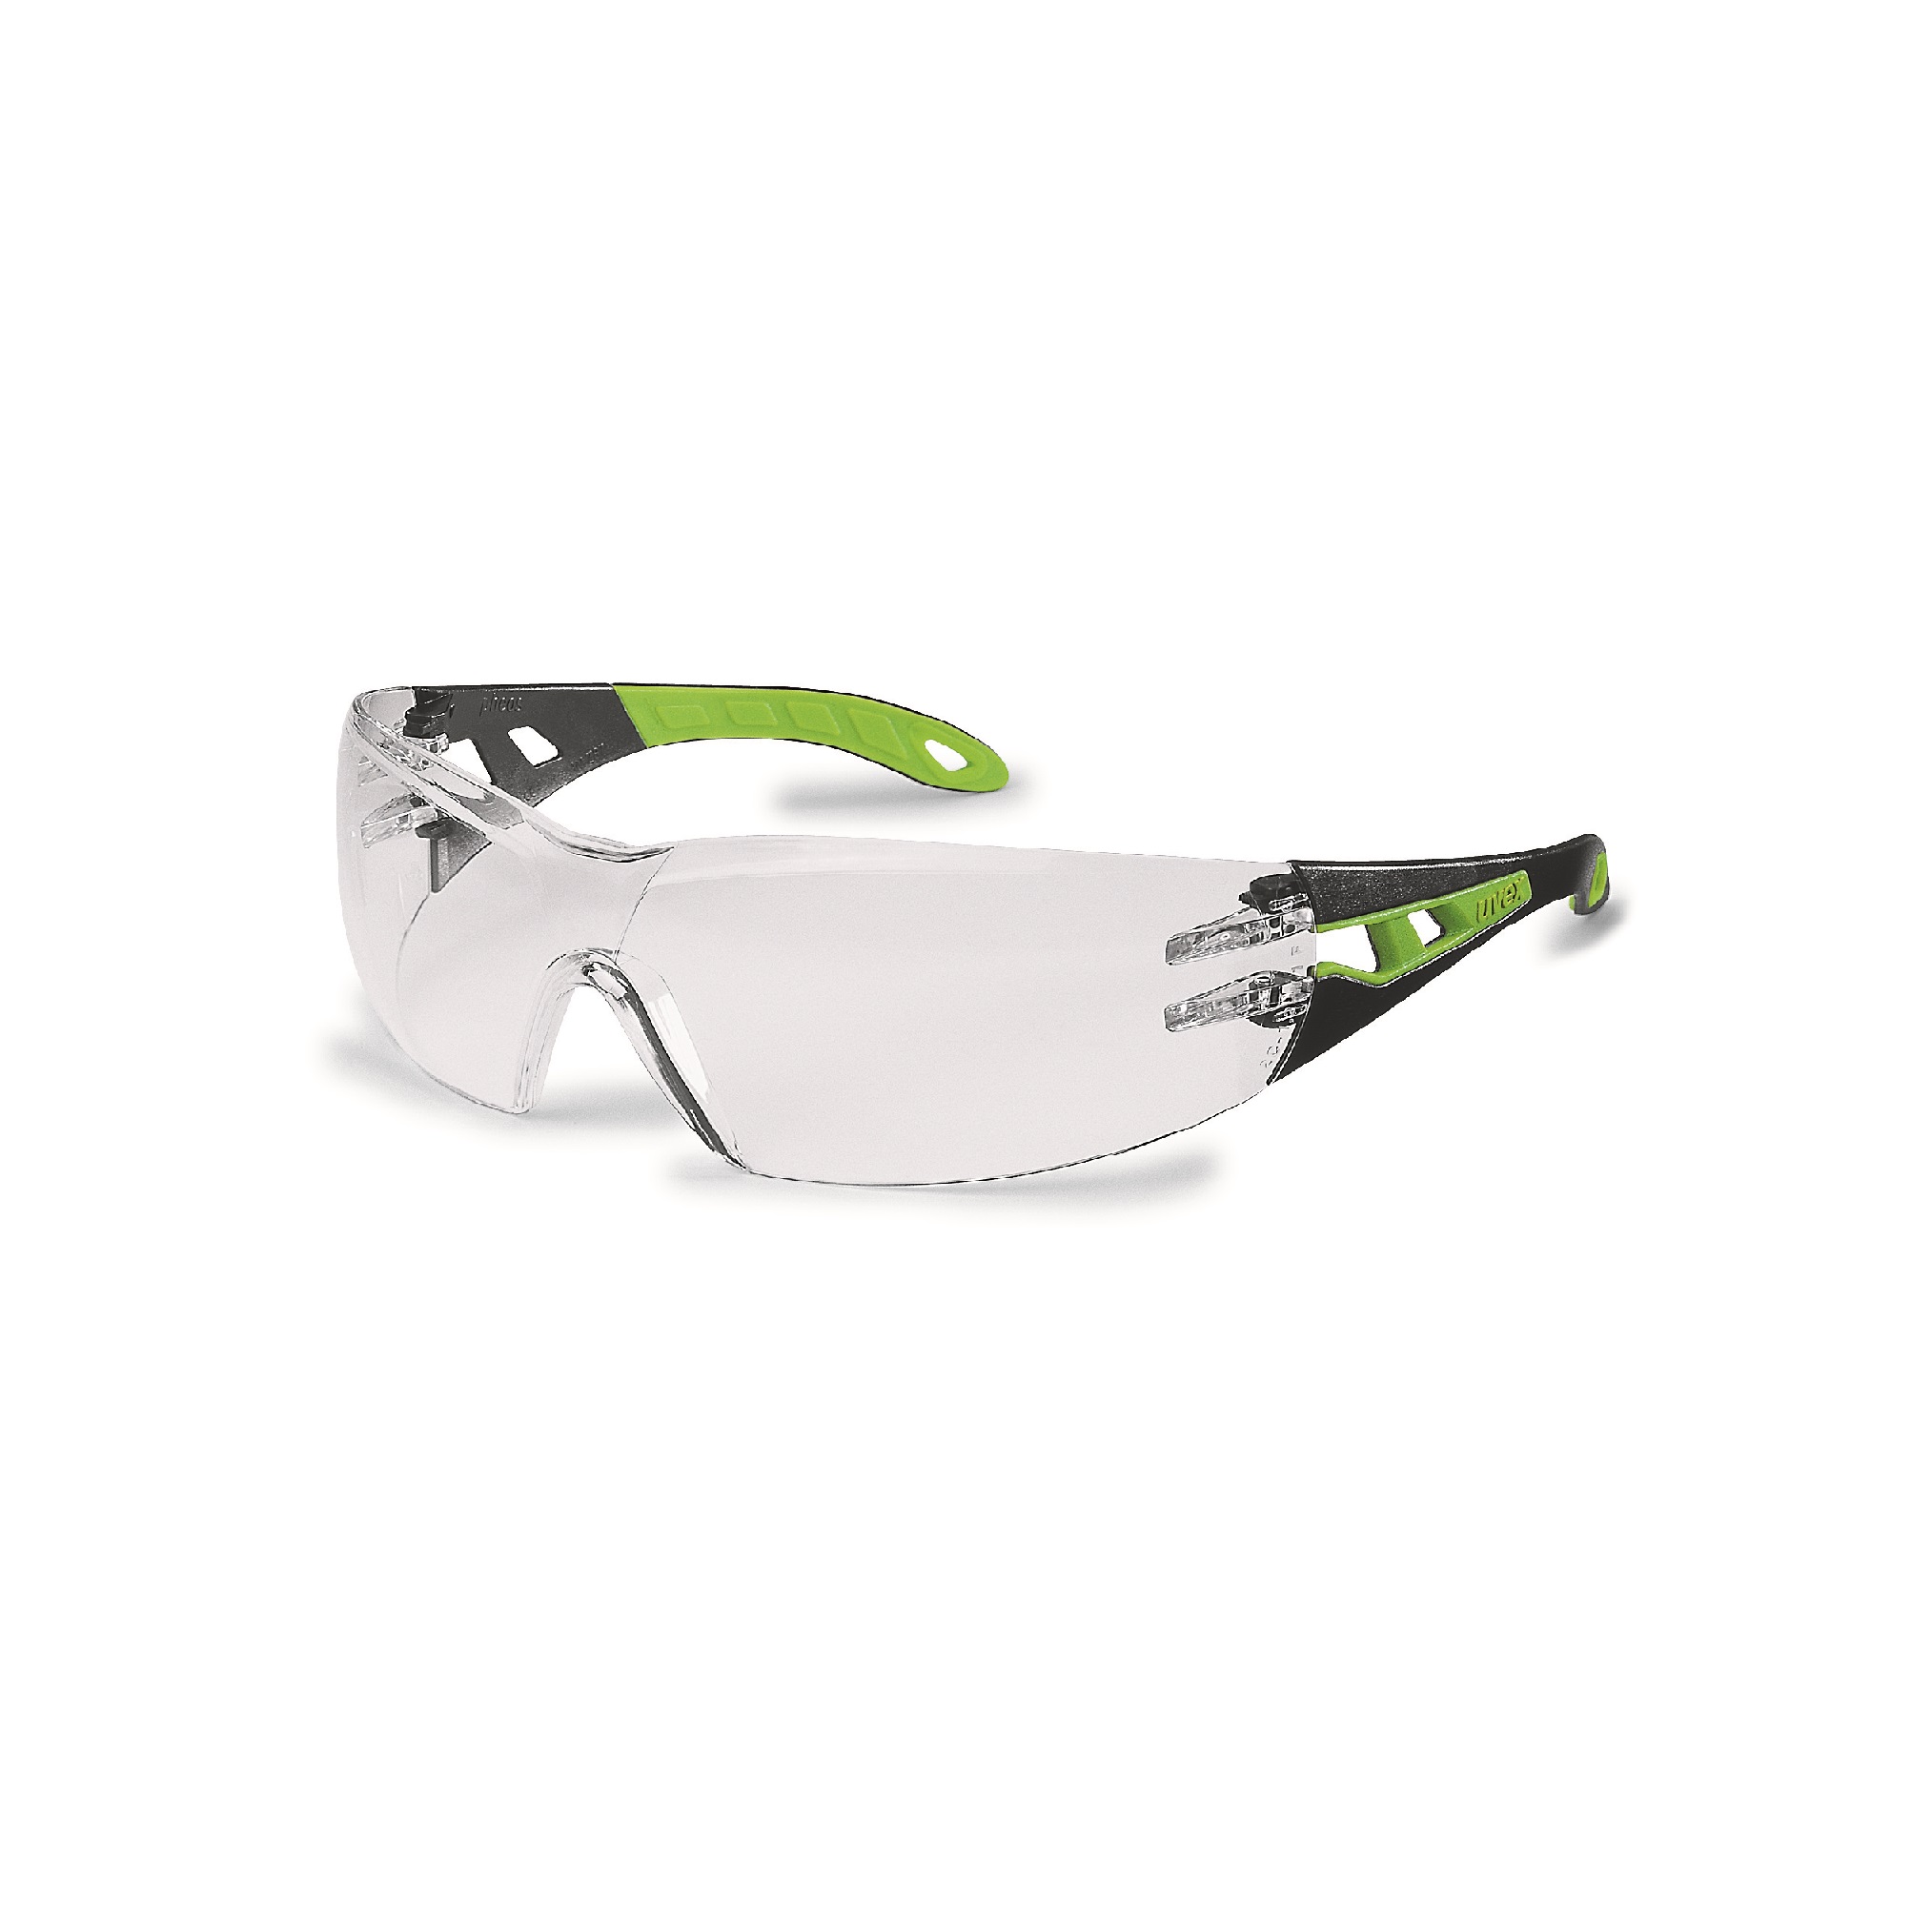 UVEX Pheos Safety Spectacles, clear lens, black/lime green small frame